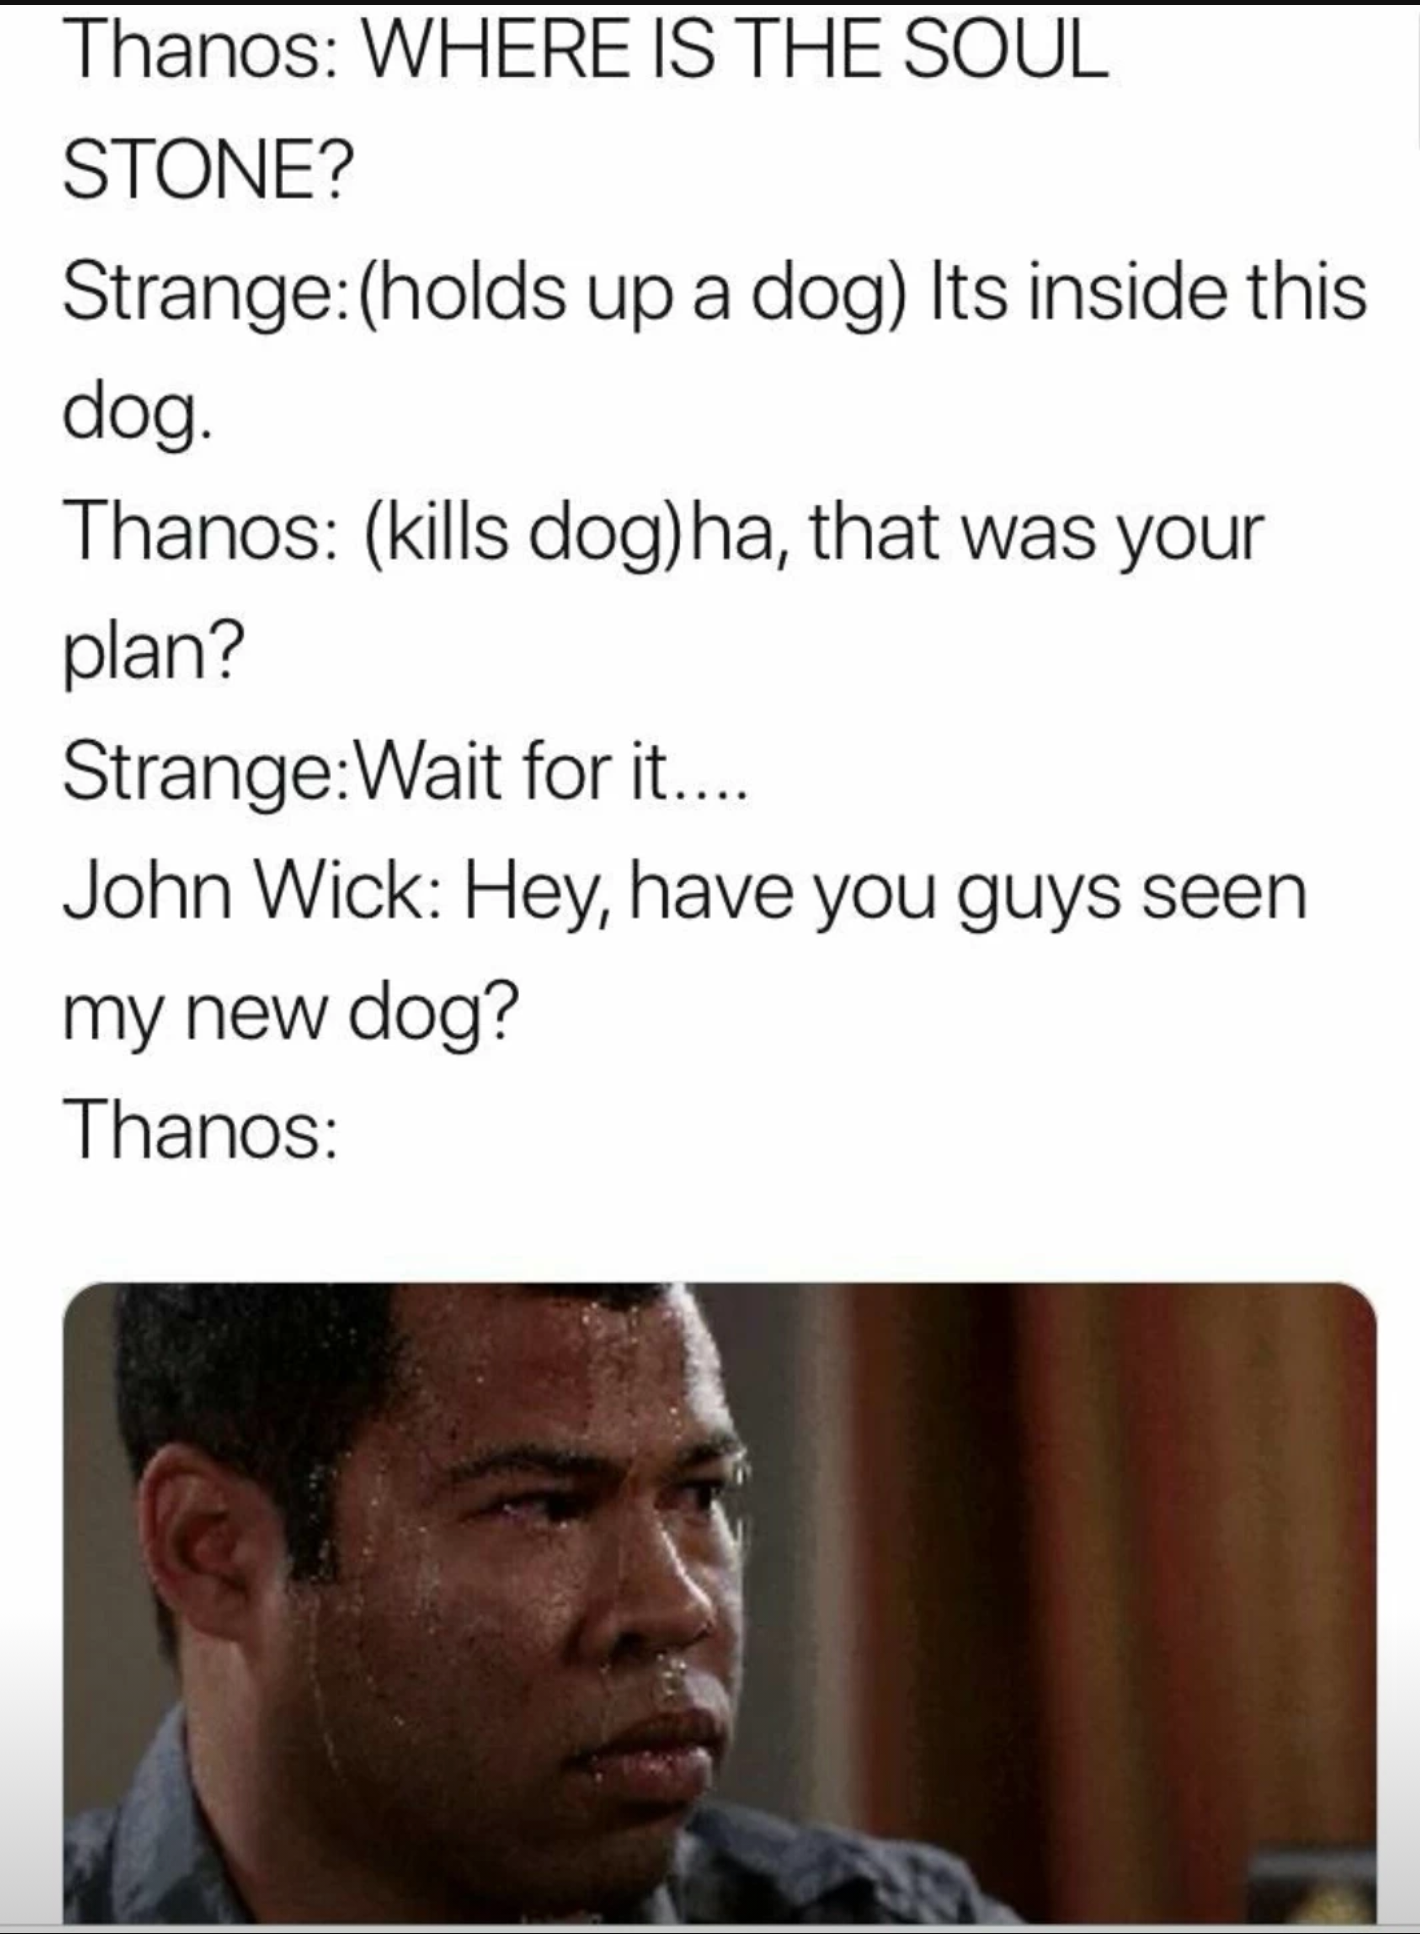 john wick dog meme thanos - Thanos Where Is The Soul Stone? Strangeholds up a dog Its inside this dog. Thanos kills dog ha, that was your plan? StrangeWait for it.... John Wick Hey, have you guys seen my new dog? Thanos